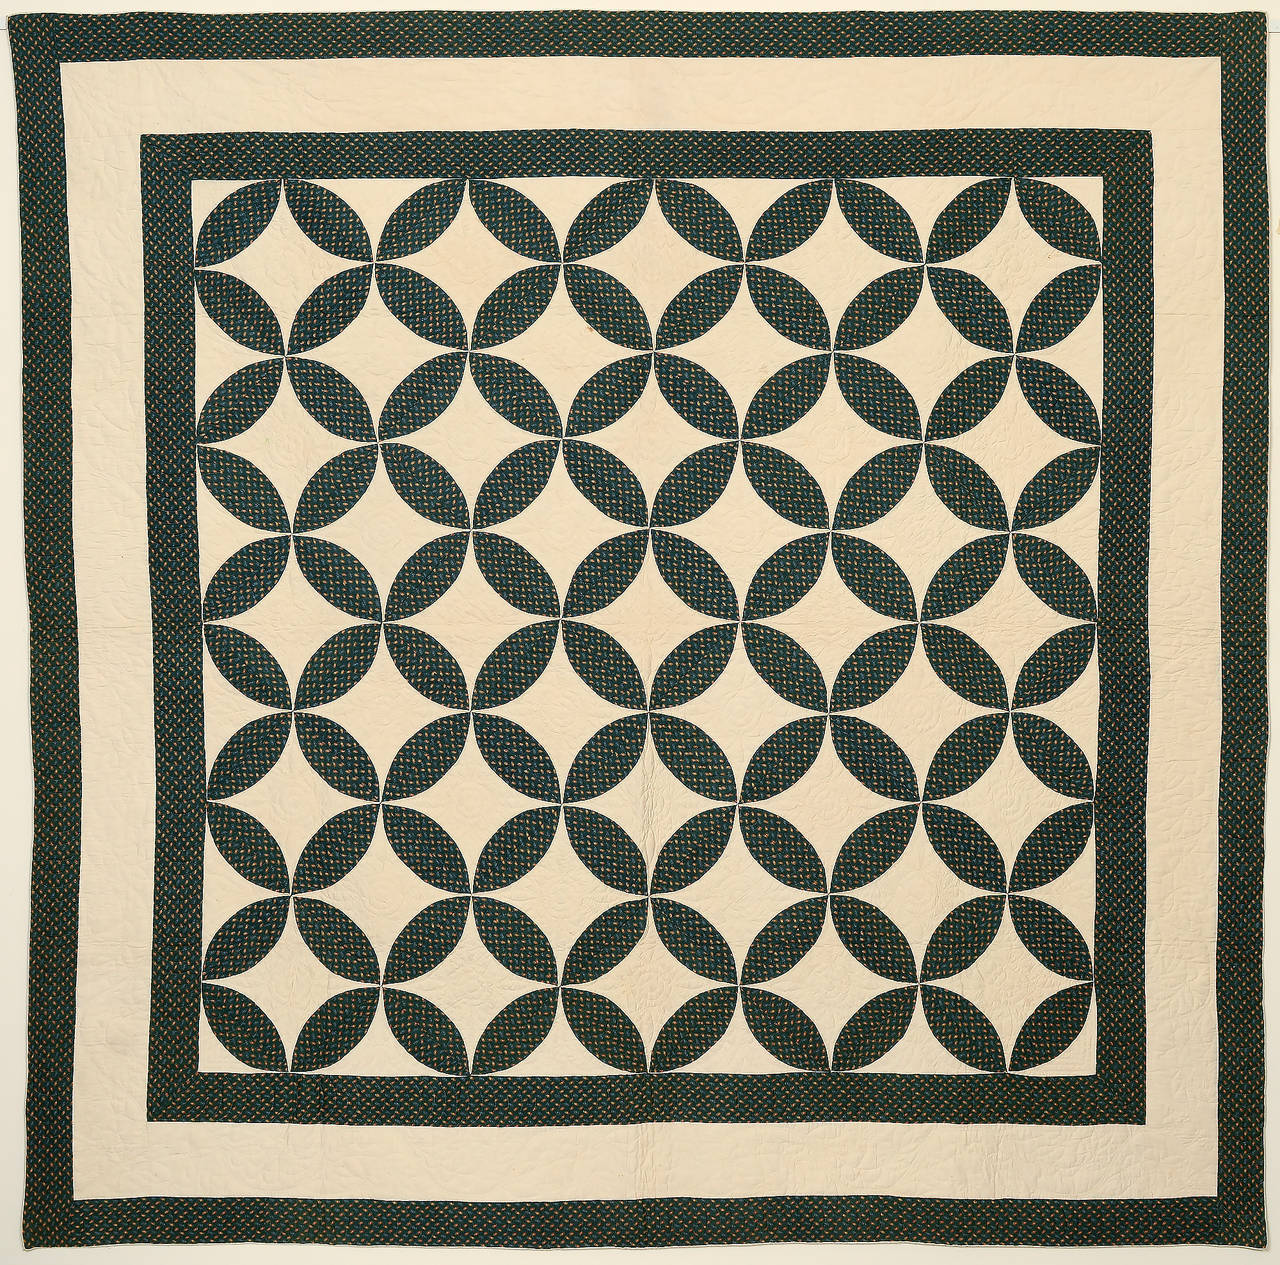 This finely made melon patch quilt is done with an unusual fabric that is a wonderful teal blue or green tone. It is well quilted with stylized floral patterns throughout. It is in excellent, unwashed condition. Measurements are 88